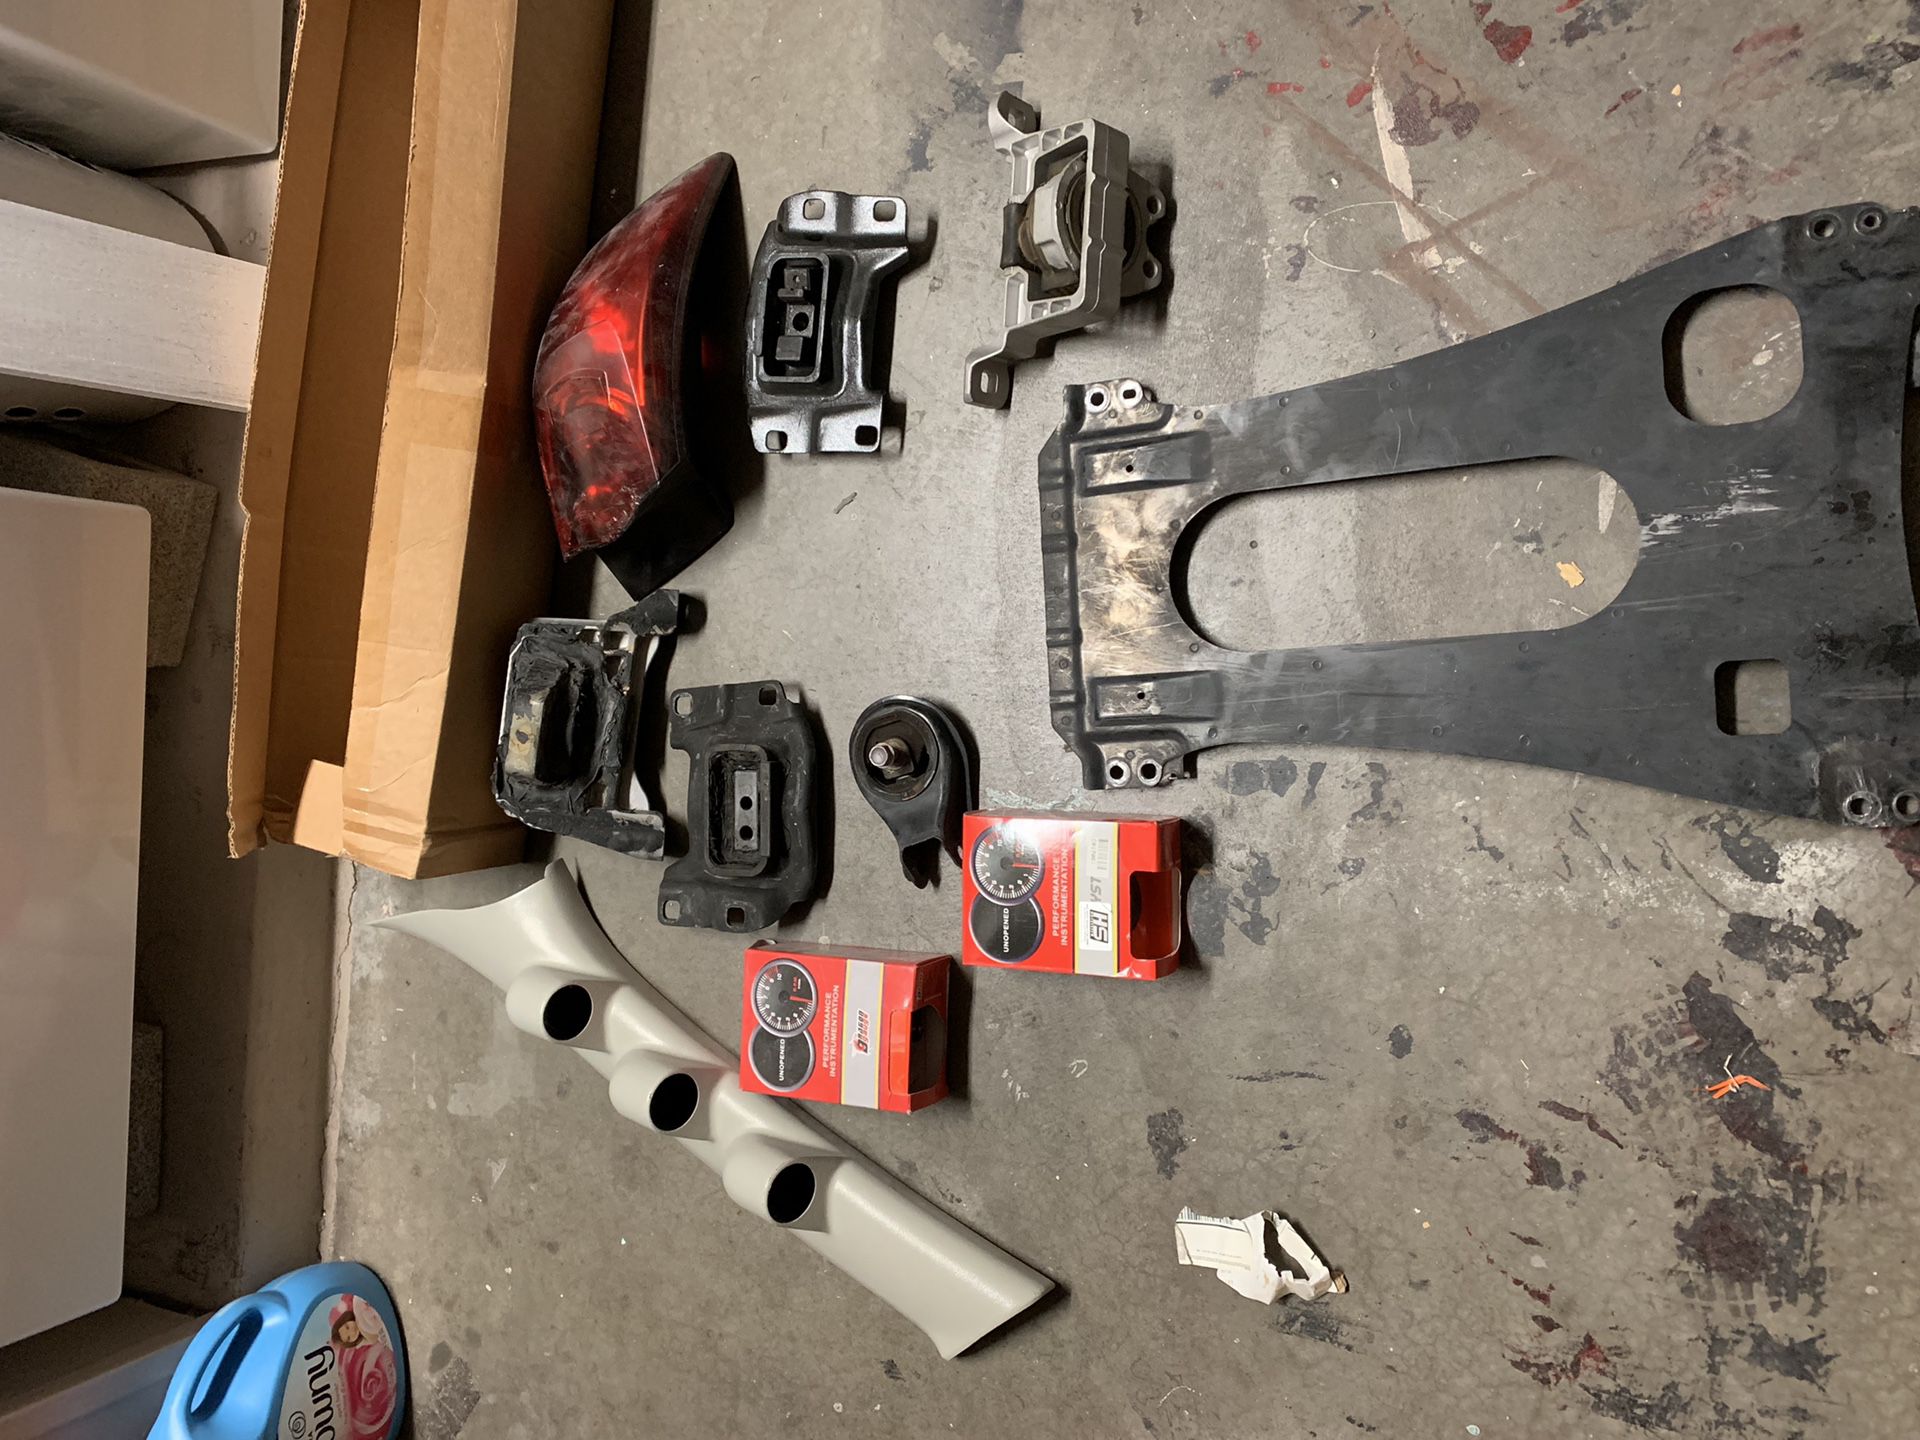 Mazdaspeed3 and MAZDA 3 mounts and other parts